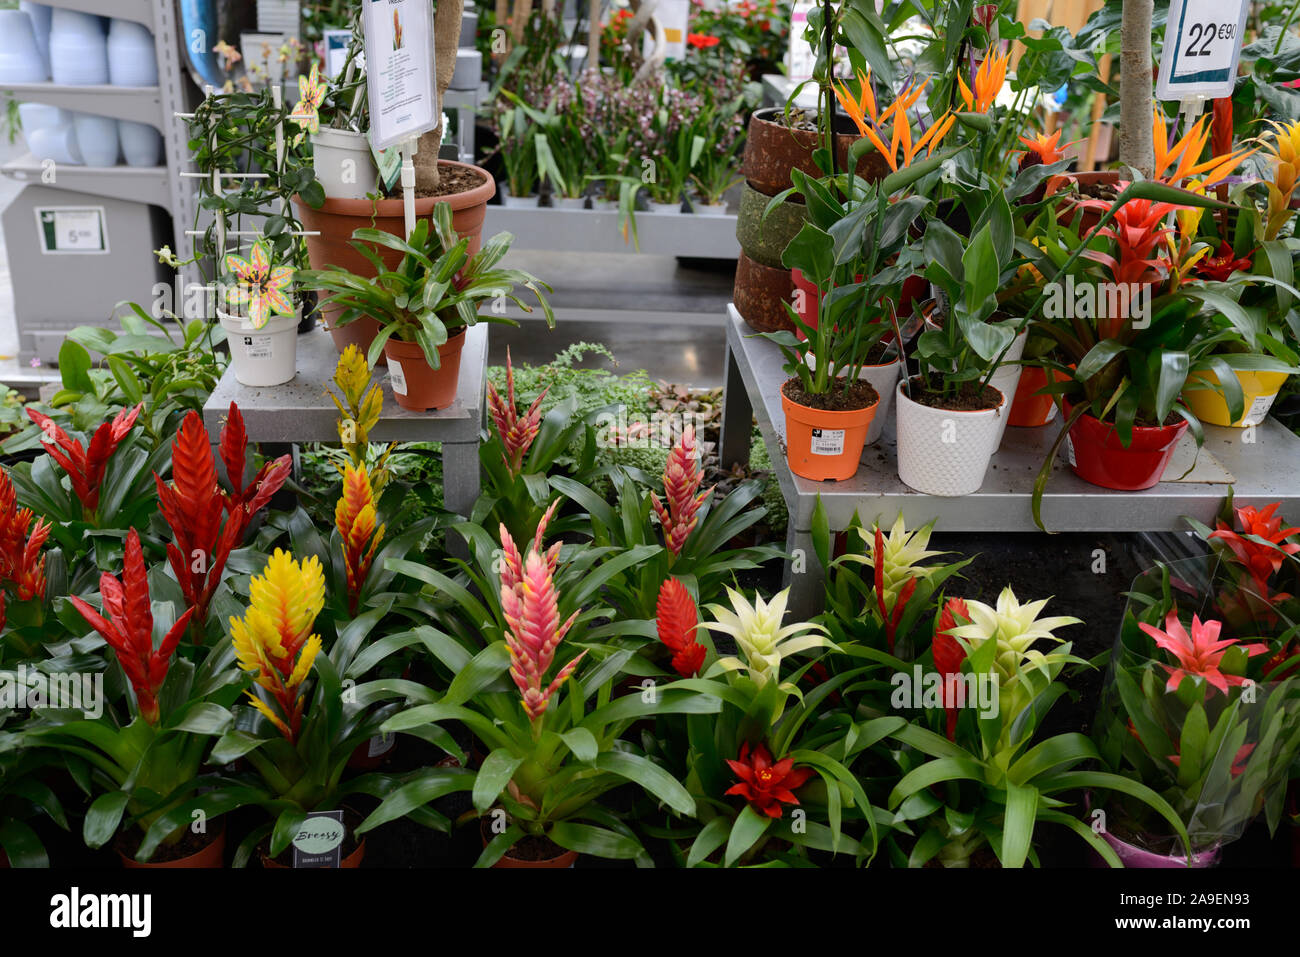 Plant Display or Collection including Bromelia Hybrids For Sale in Garden Centre or Florist Shop Stock Photo